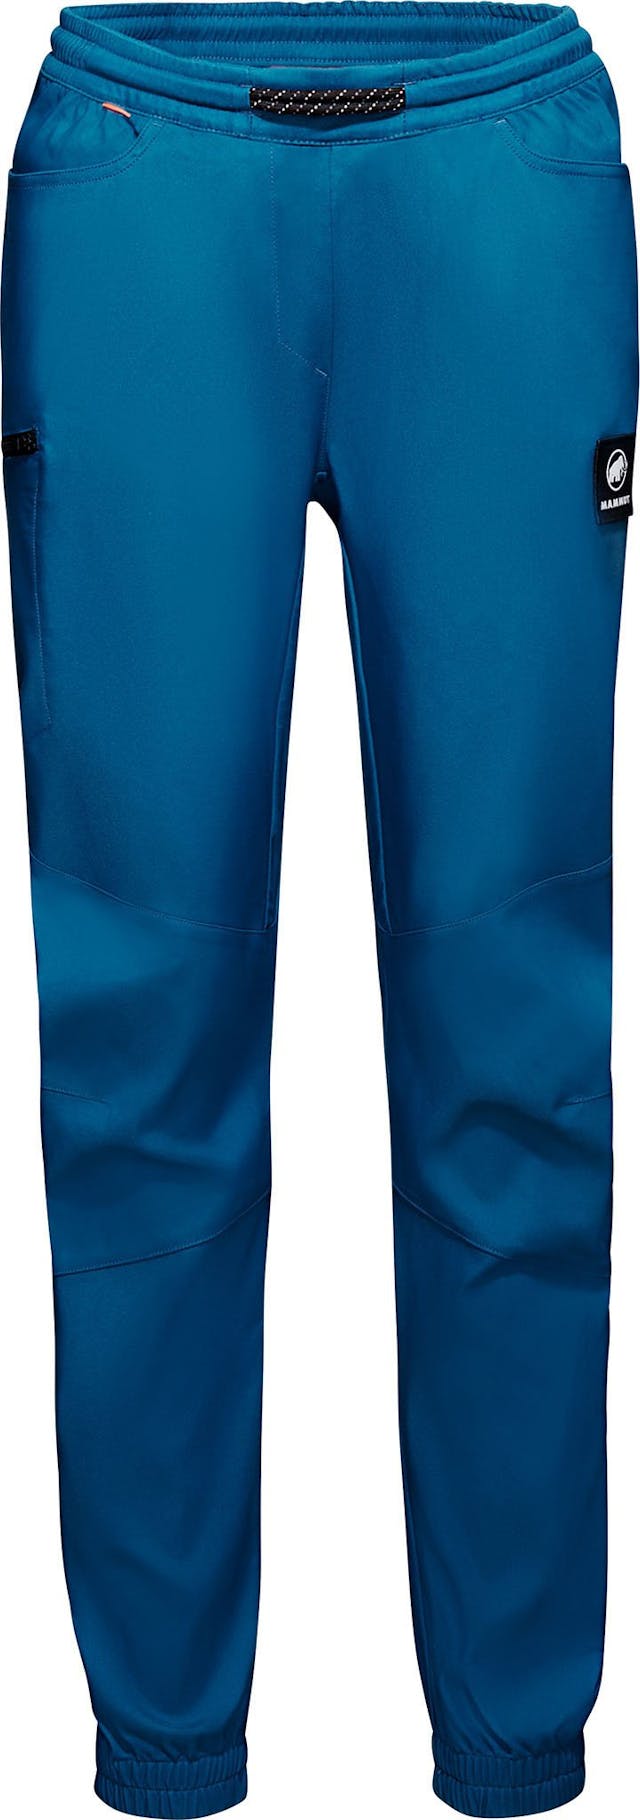 Product image for Massone Pants - Women's